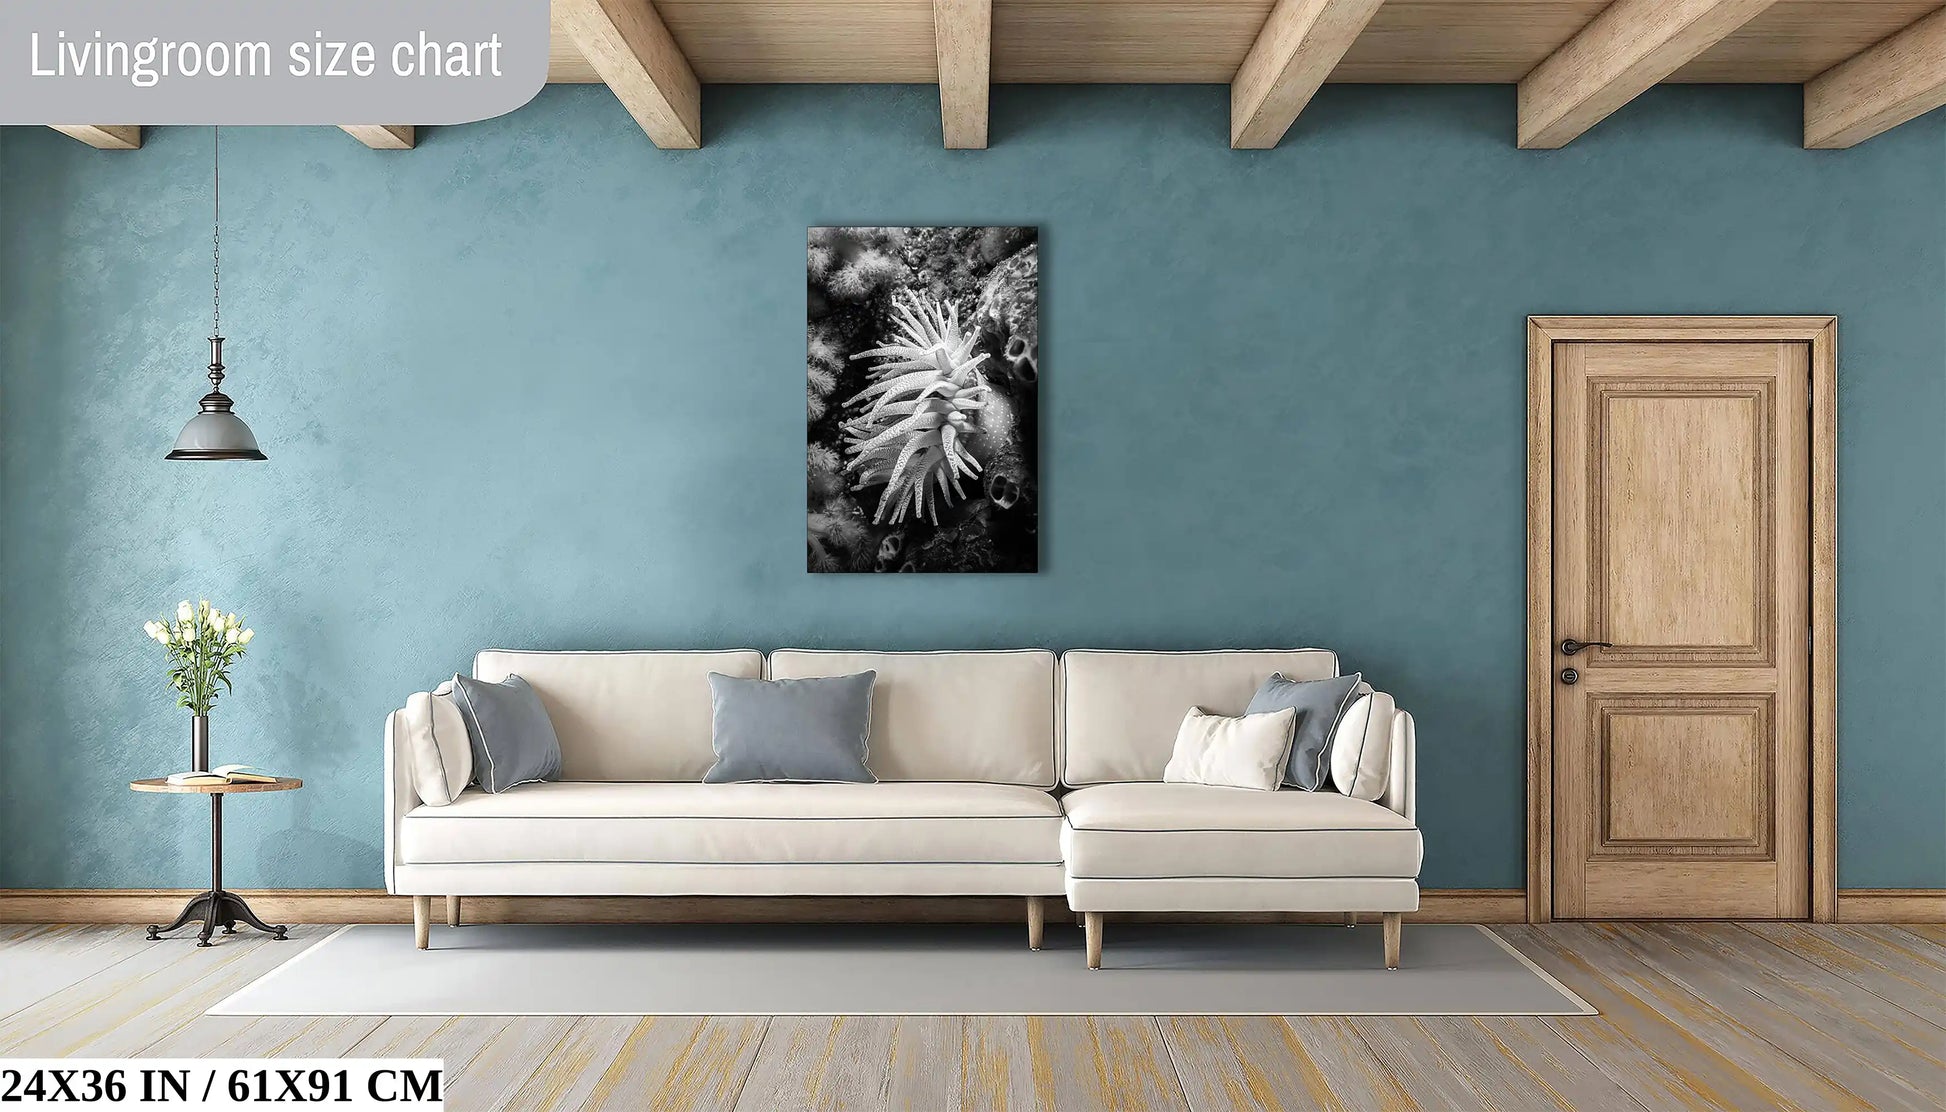 A large, 24x36-inch monochrome canvas of a Crimson Anemone creates a focal point above a living room sofa, blending well with contemporary interiors.